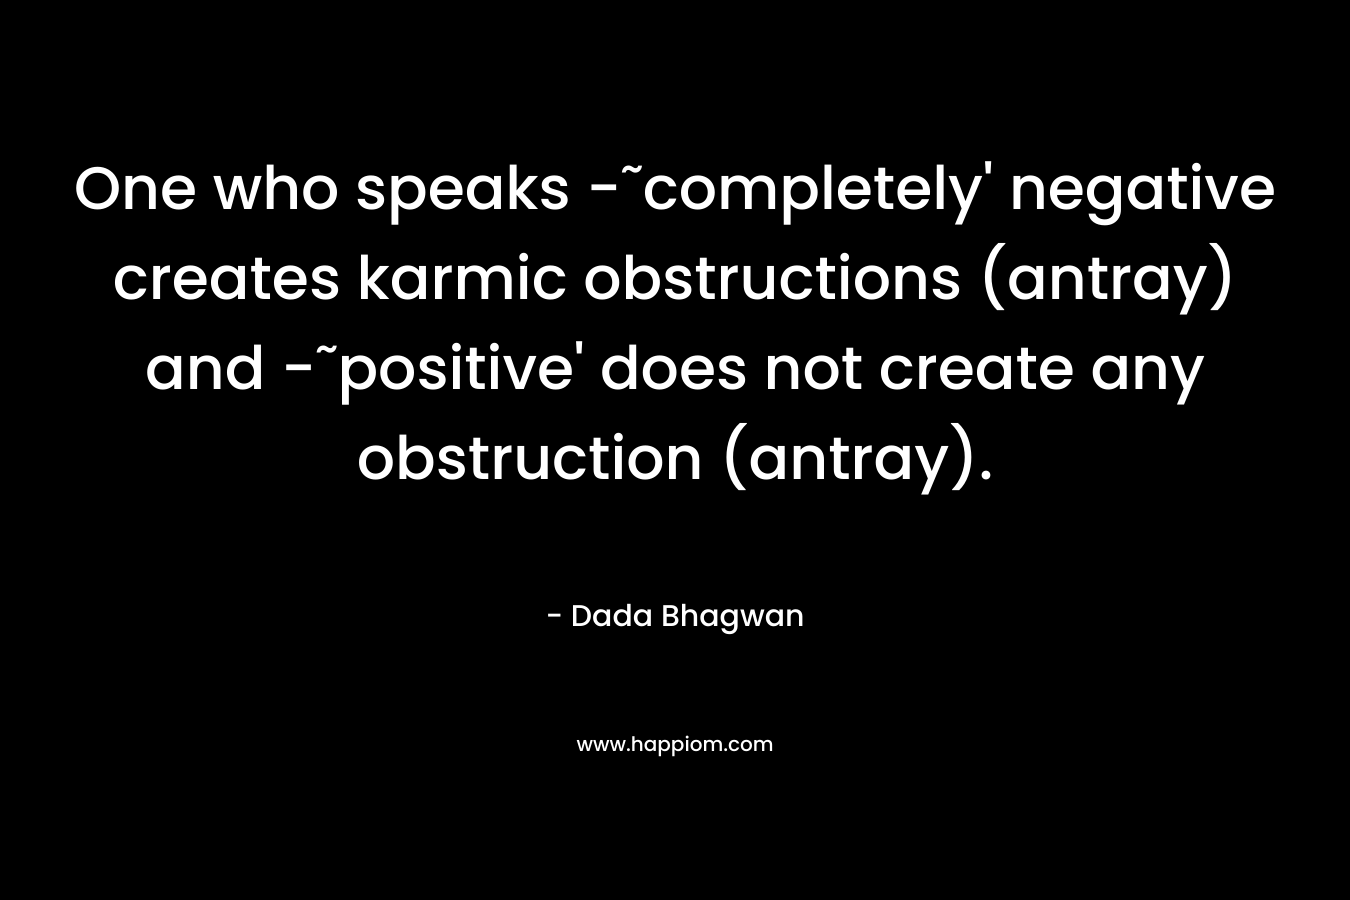 One who speaks -˜completely’ negative creates karmic obstructions (antray) and -˜positive’ does not create any obstruction (antray). – Dada Bhagwan